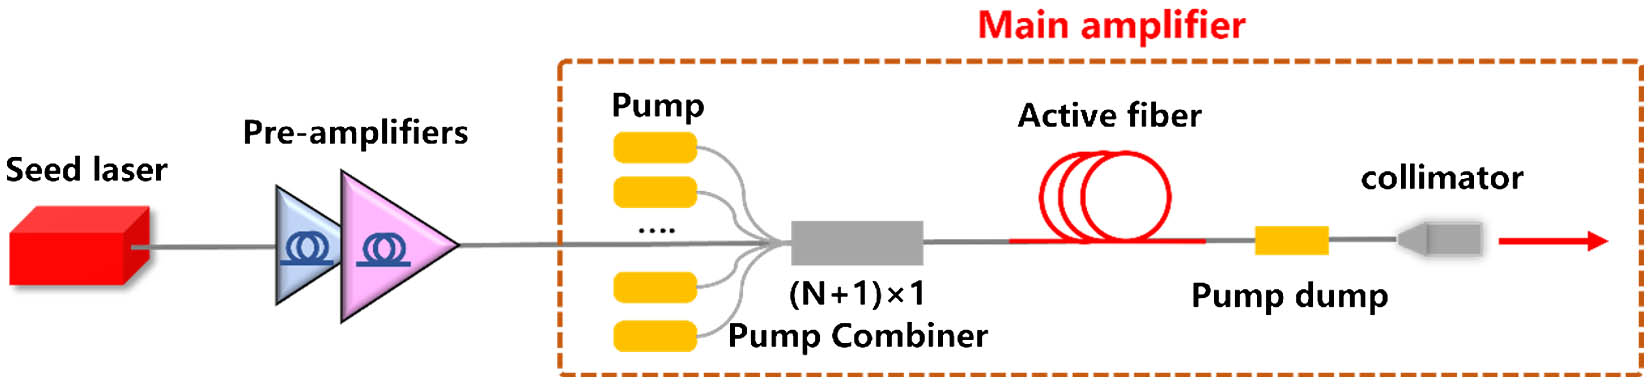 Schematic configuration of a typical fiber MOPA system.